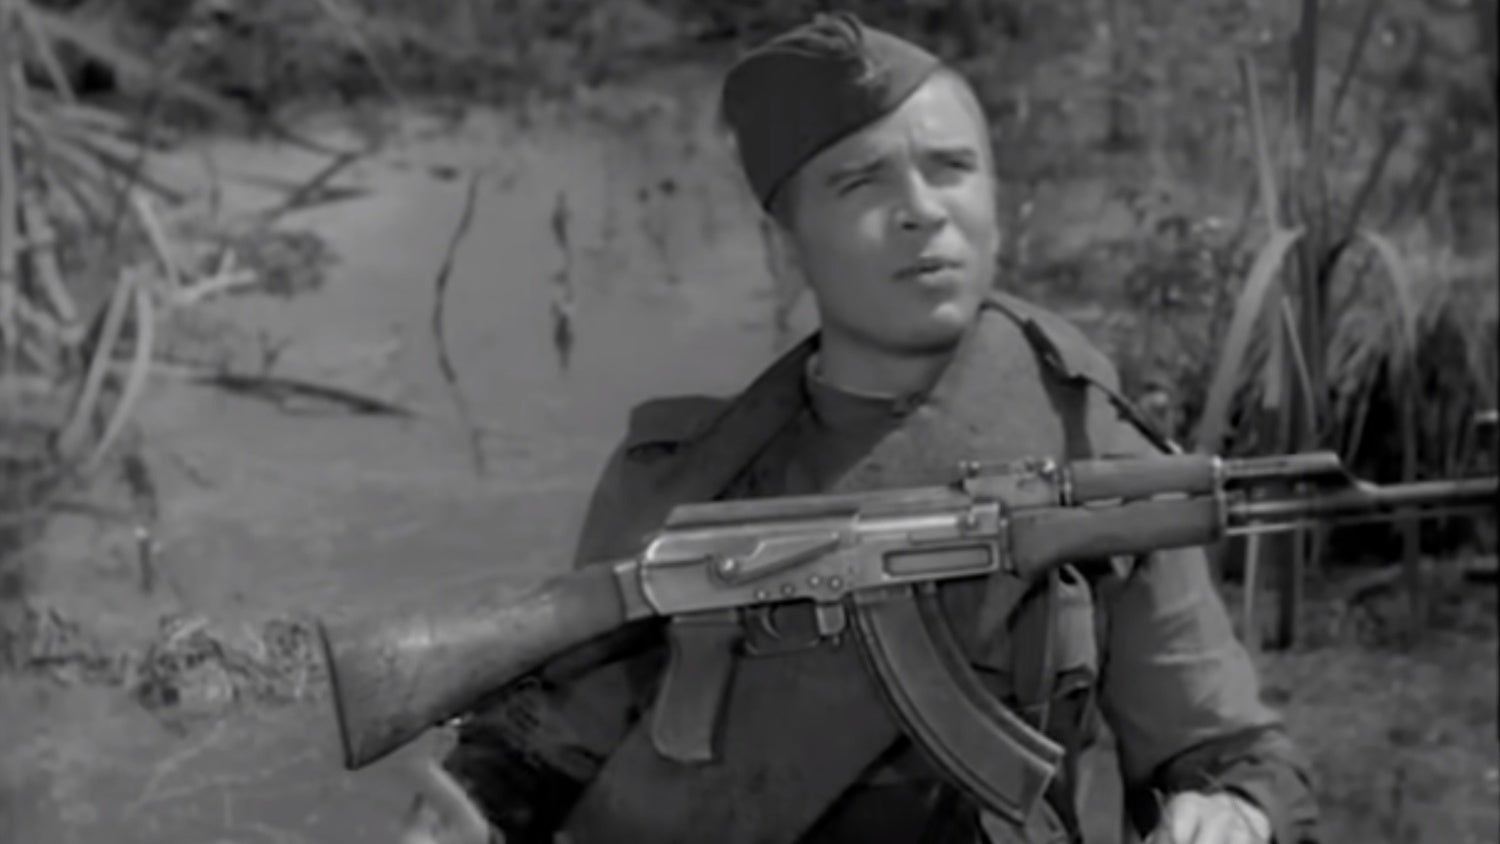 Screenshot from the movie "Maksim Perepelitsa" with a classic Type 2 AK